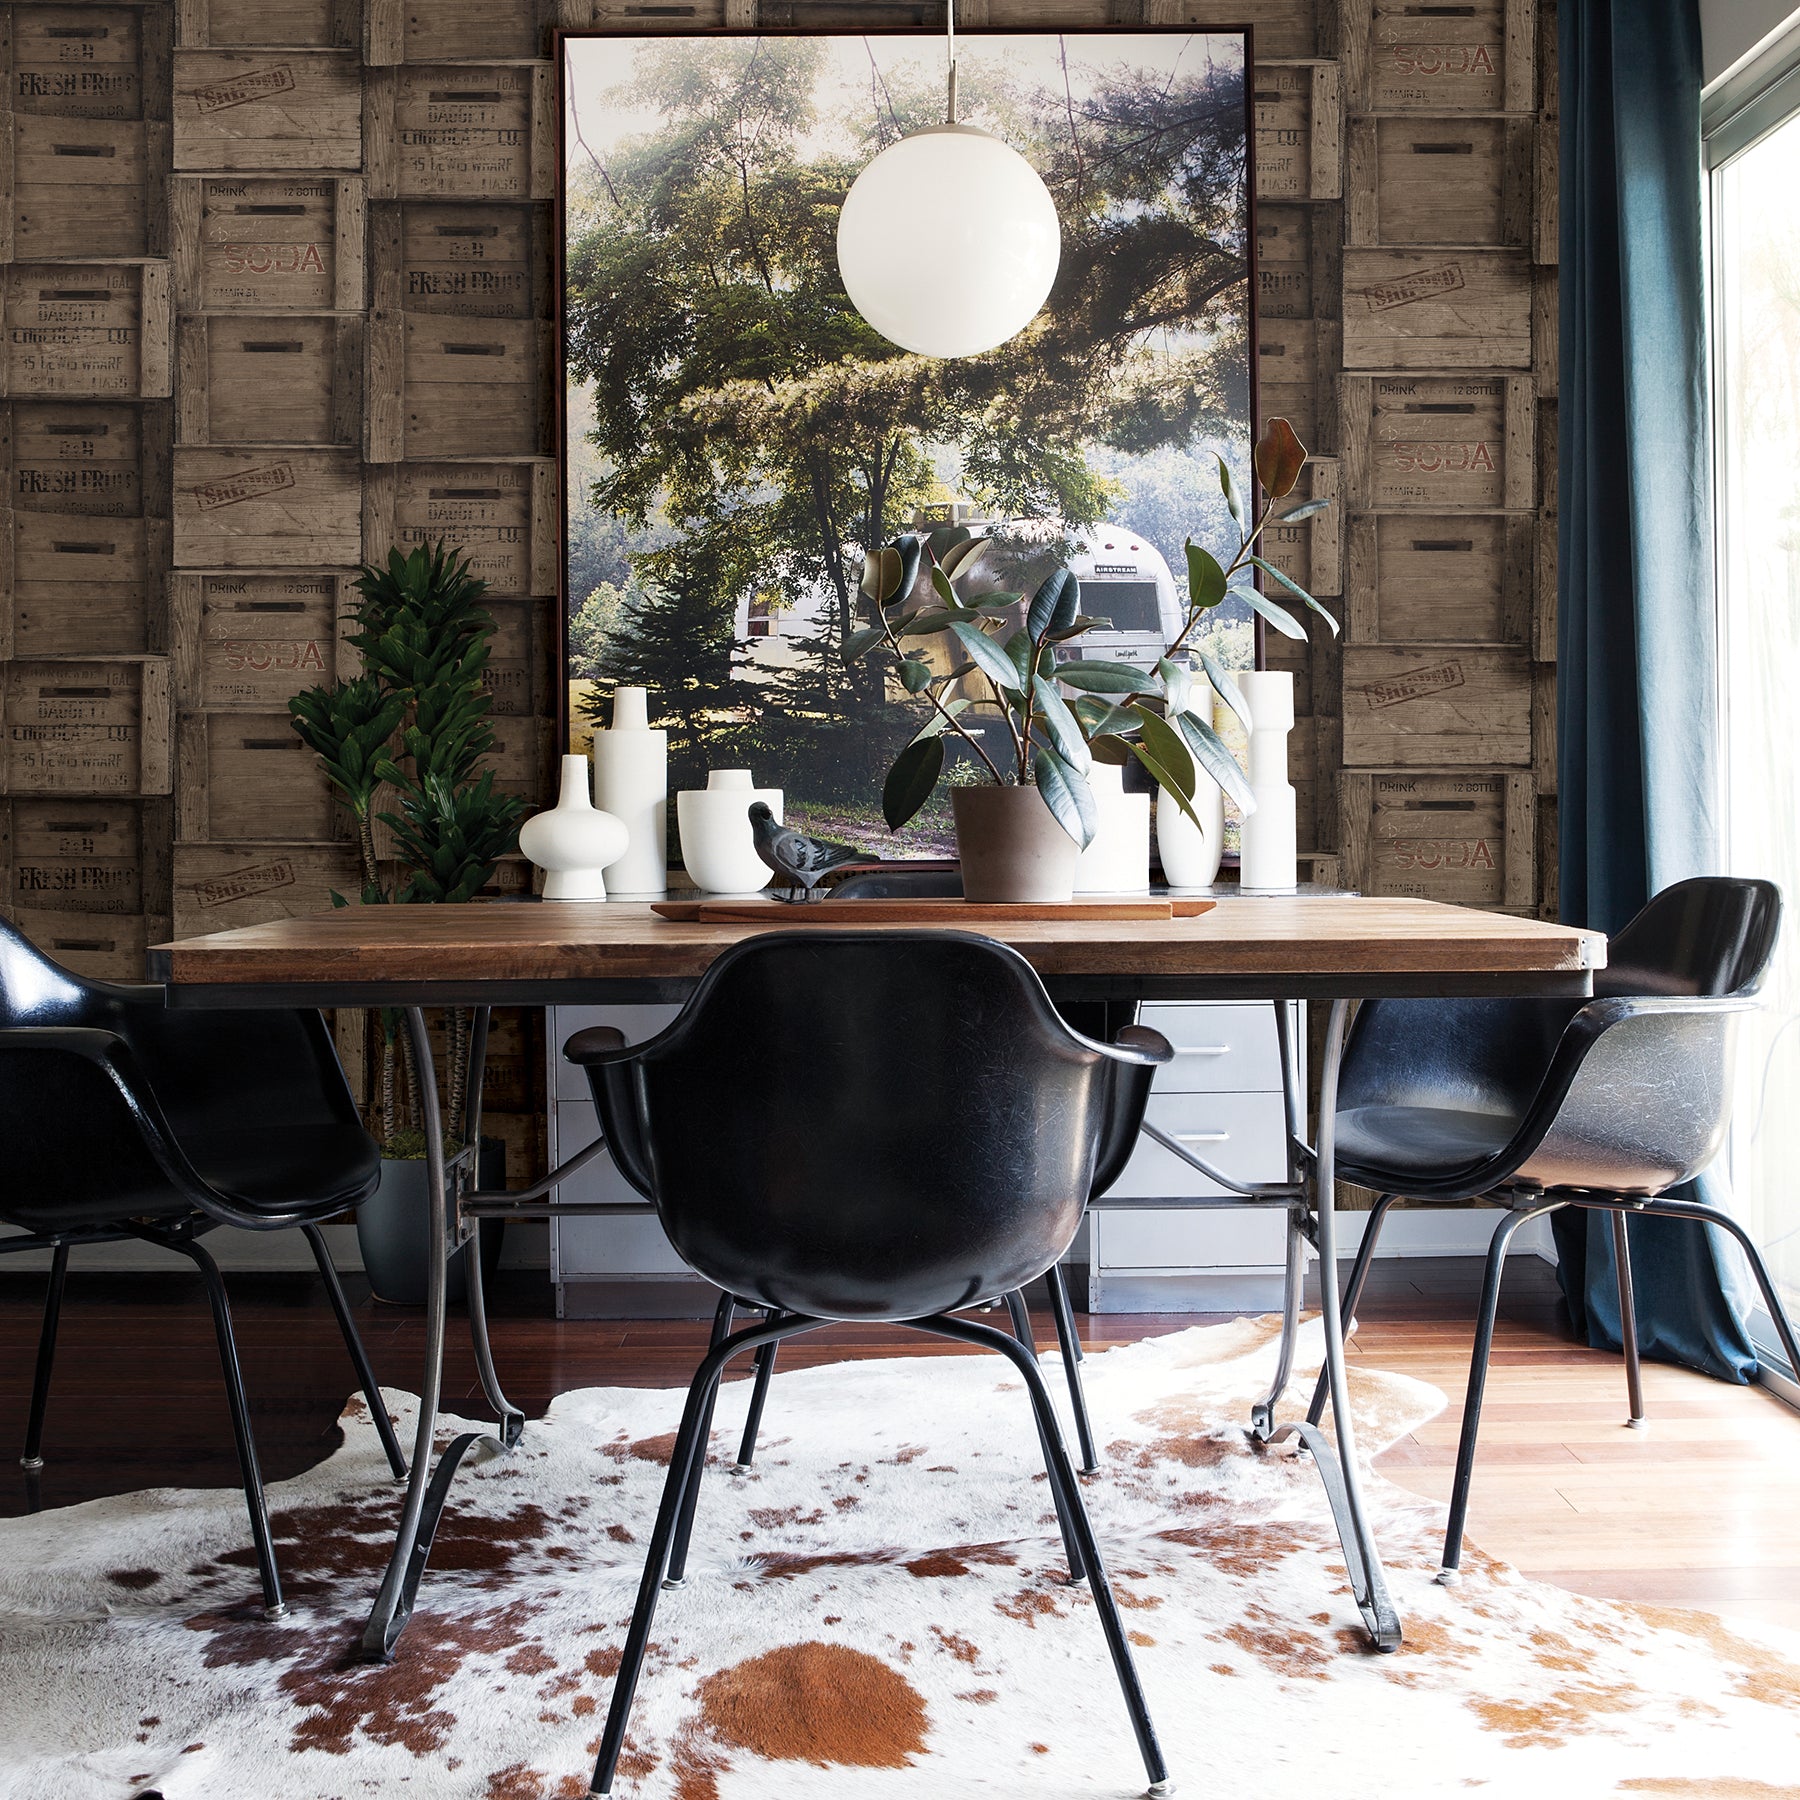 Acquire 2701-22350 Reclaimed Dark Wood Faux Effects A-Street Prints Wallpaper